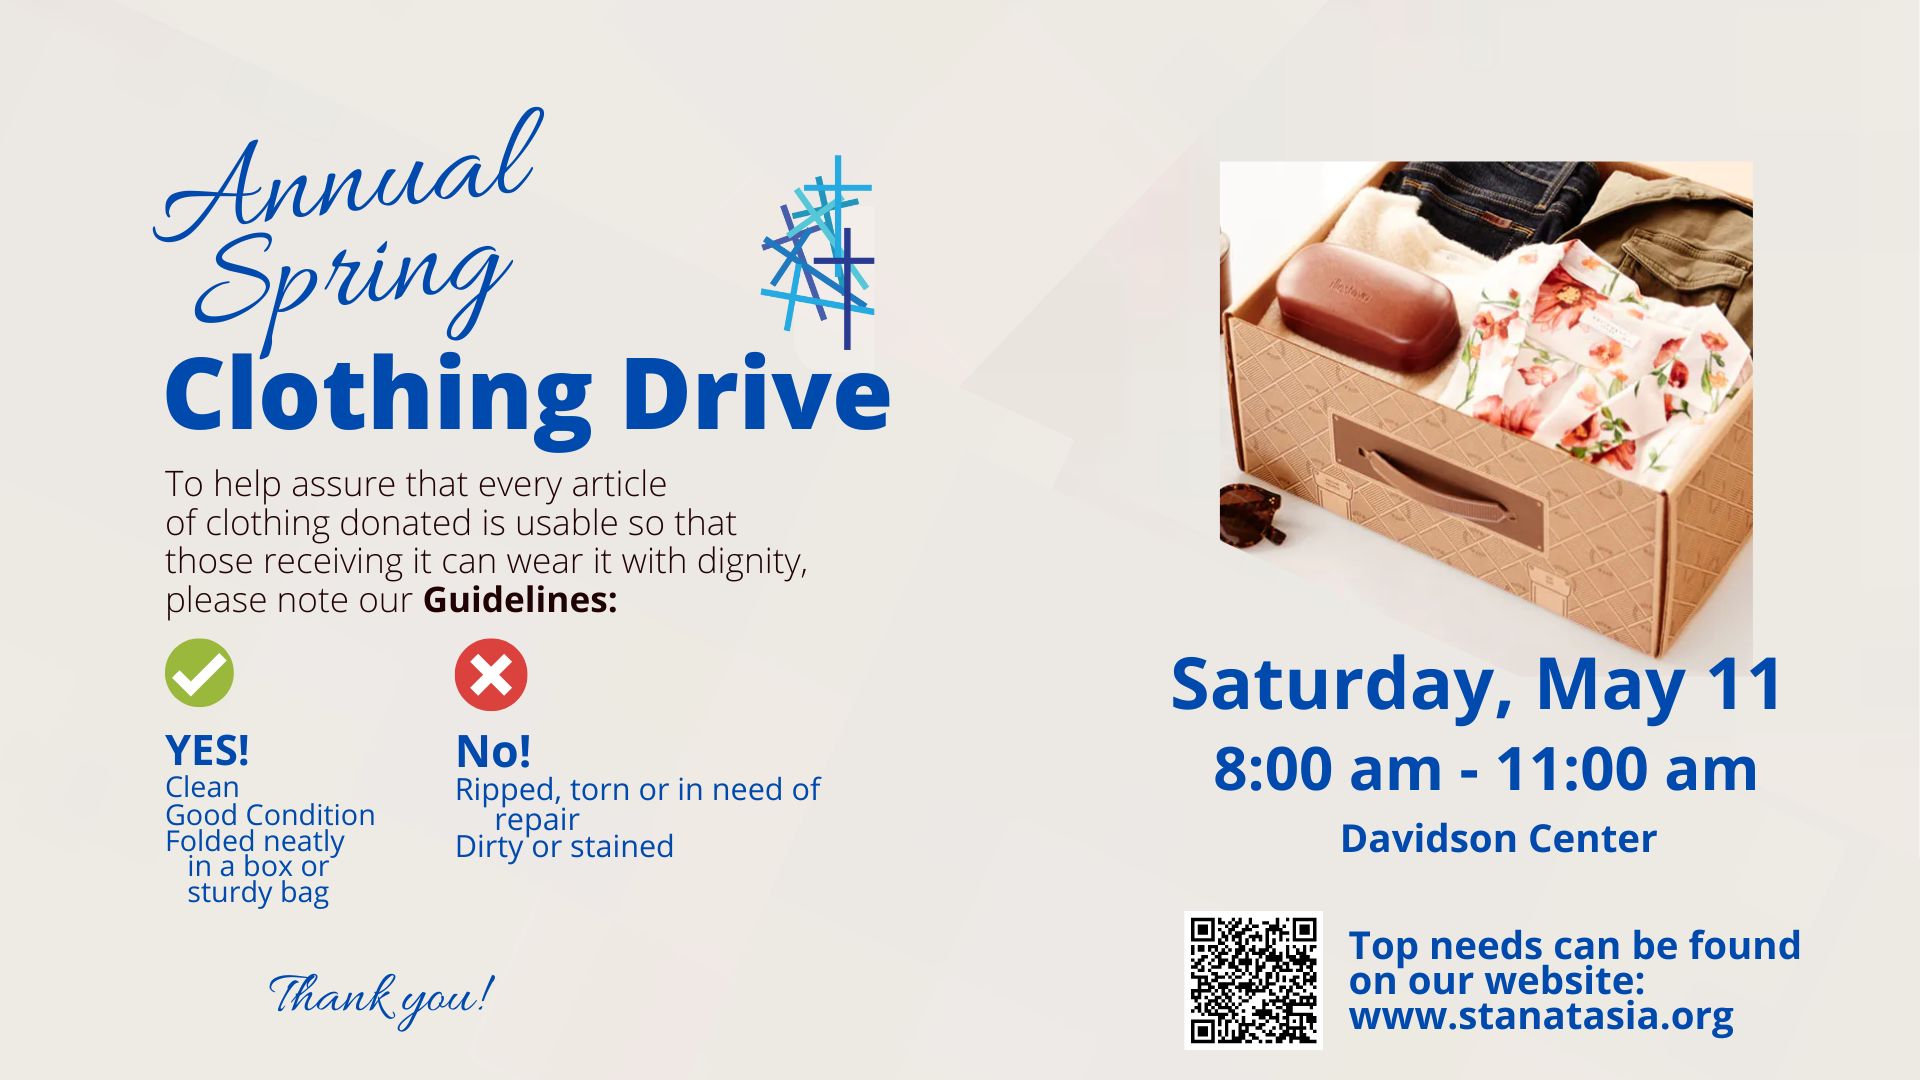 Annual Clothing Drive